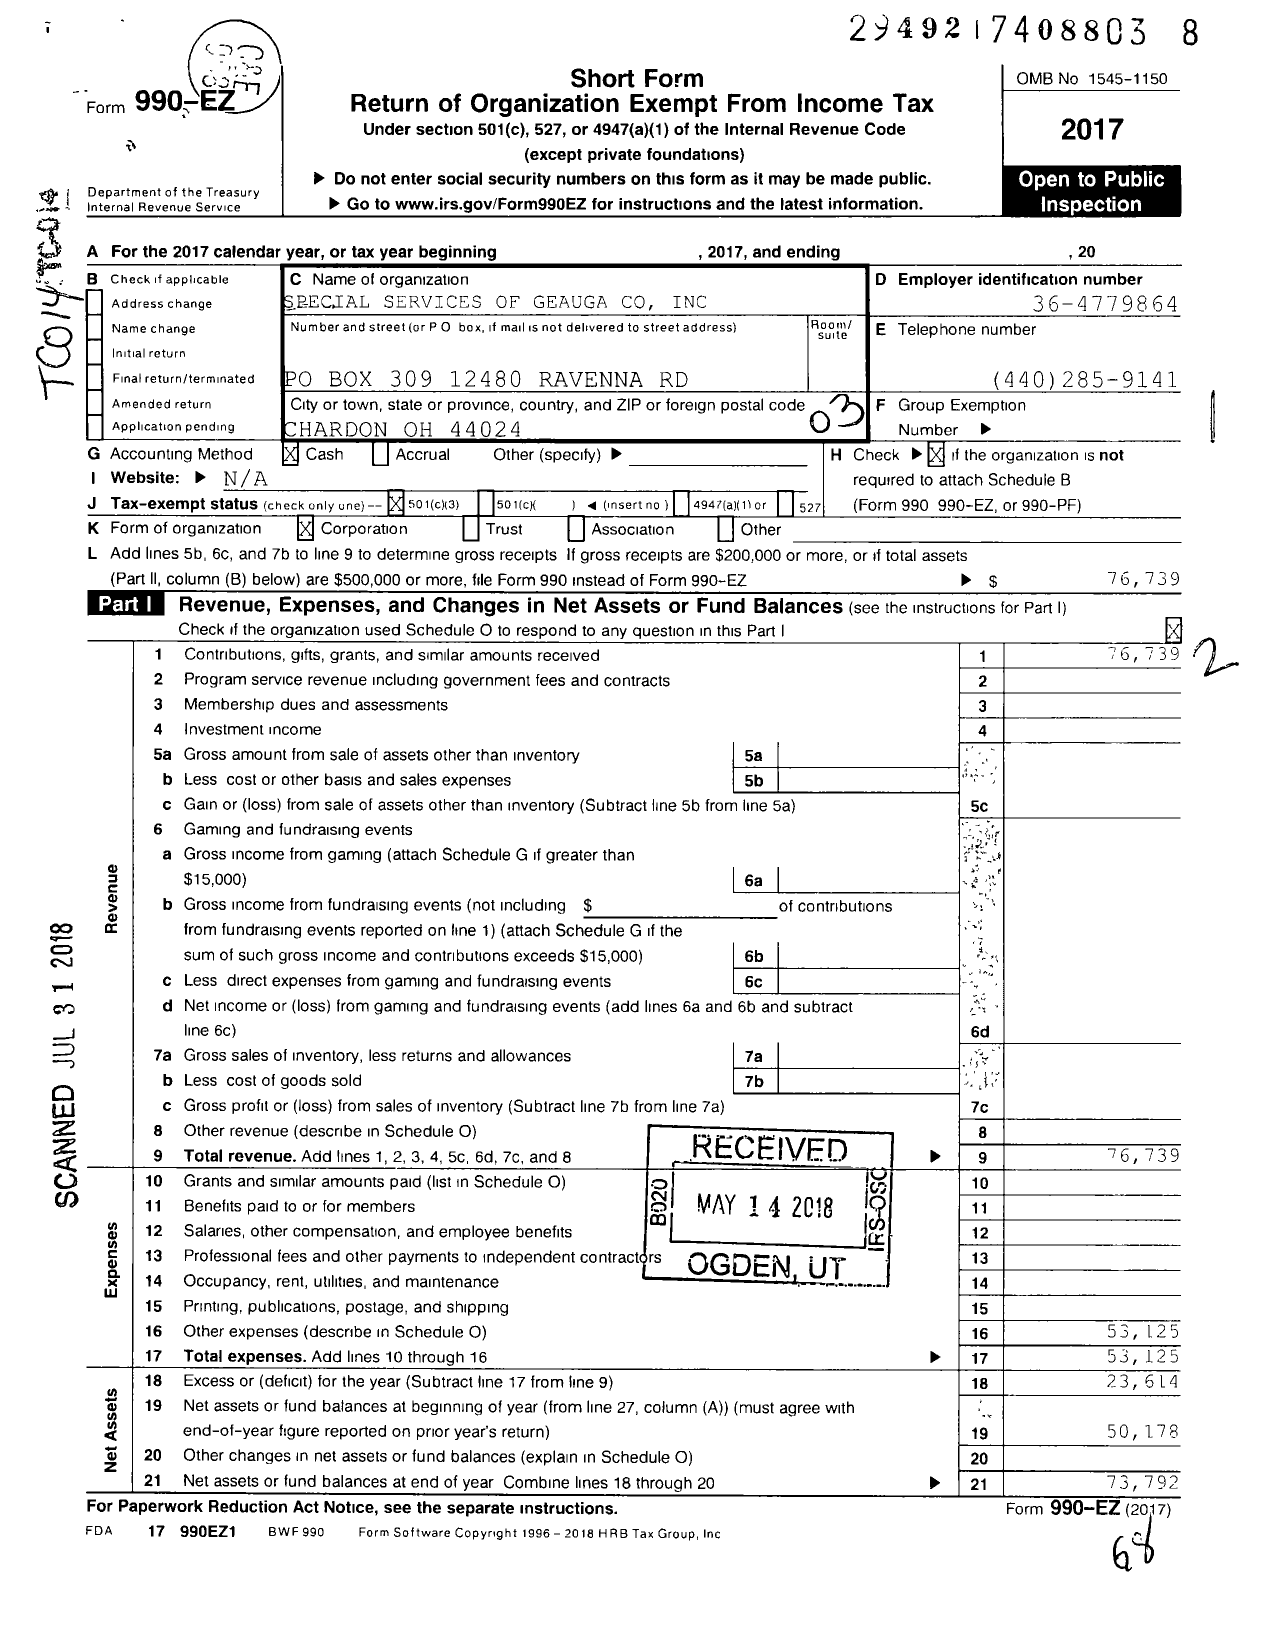 Image of first page of 2017 Form 990EZ for Special Services of Geauga